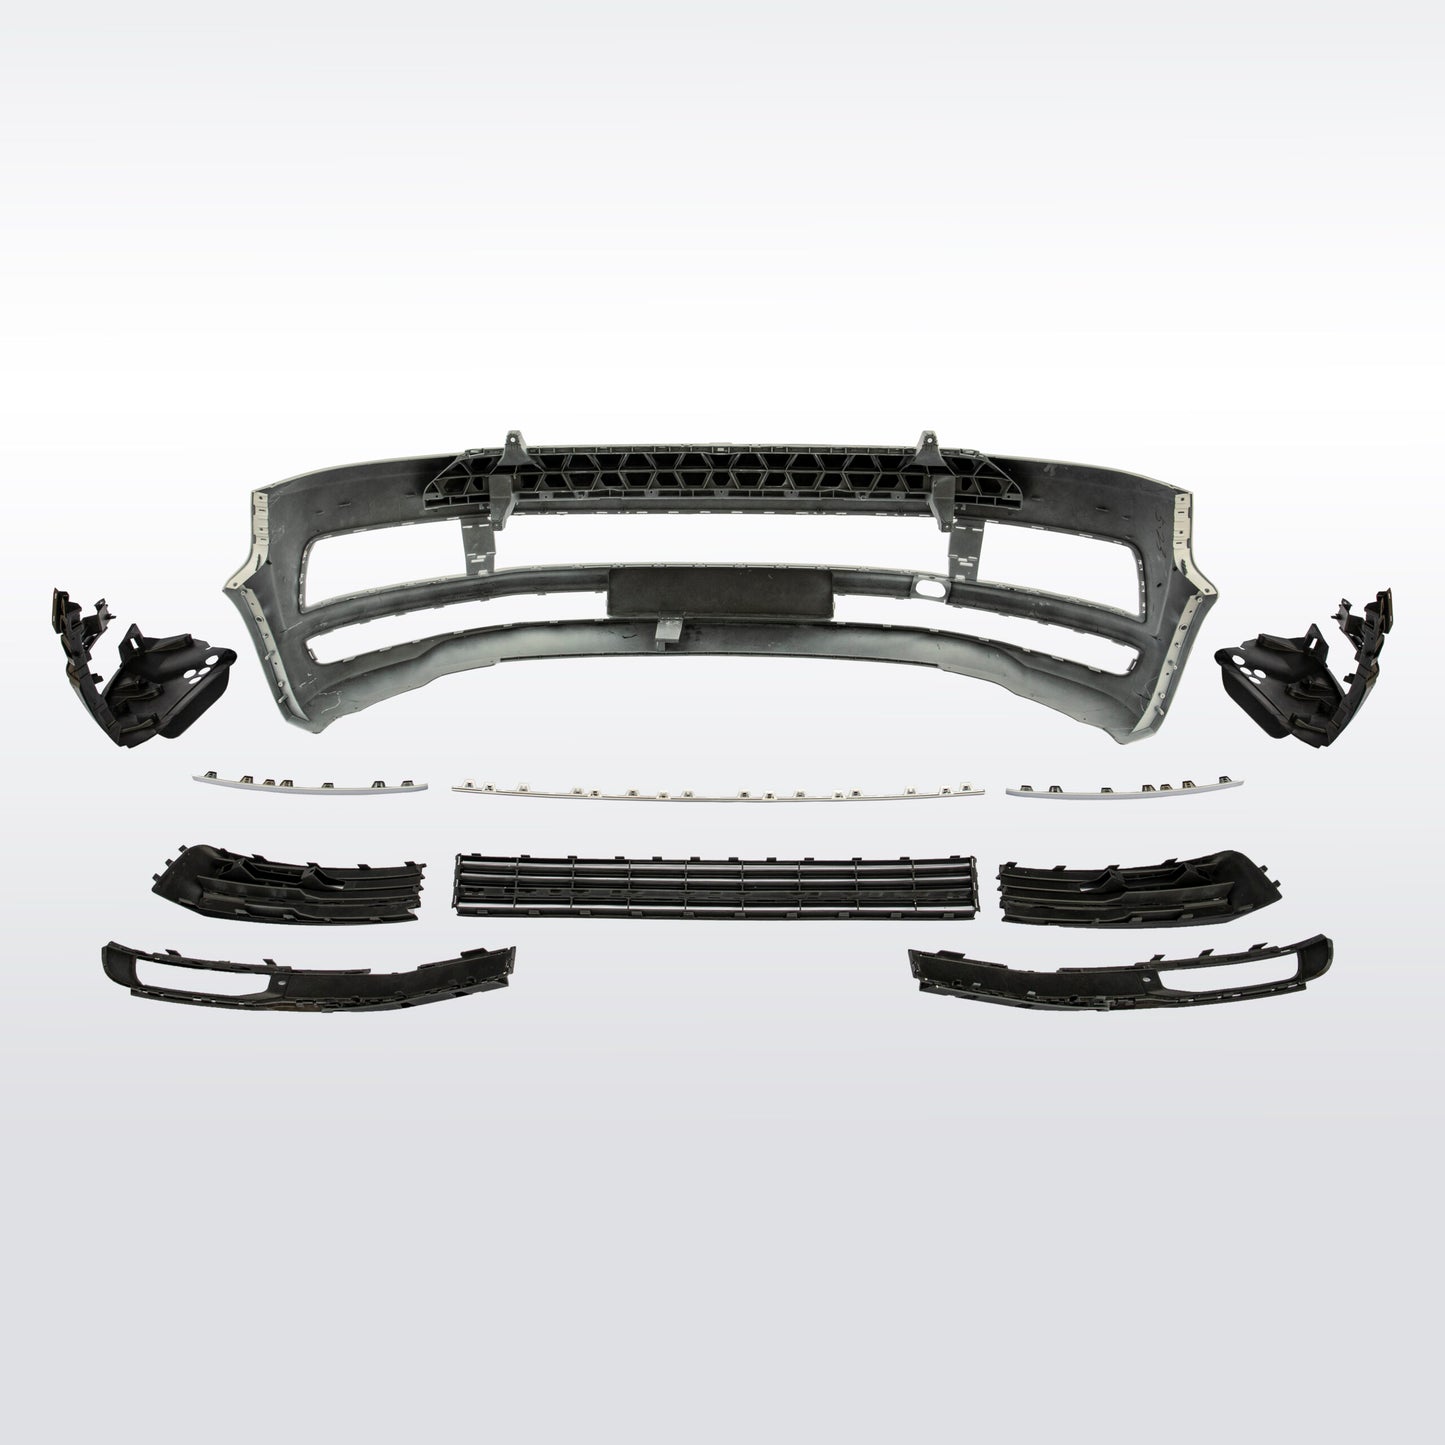 VW T5.1 Transporter NEW Front Bumper T5-X Front Styling Upgrade Painted and ready to fit in 3 colour options